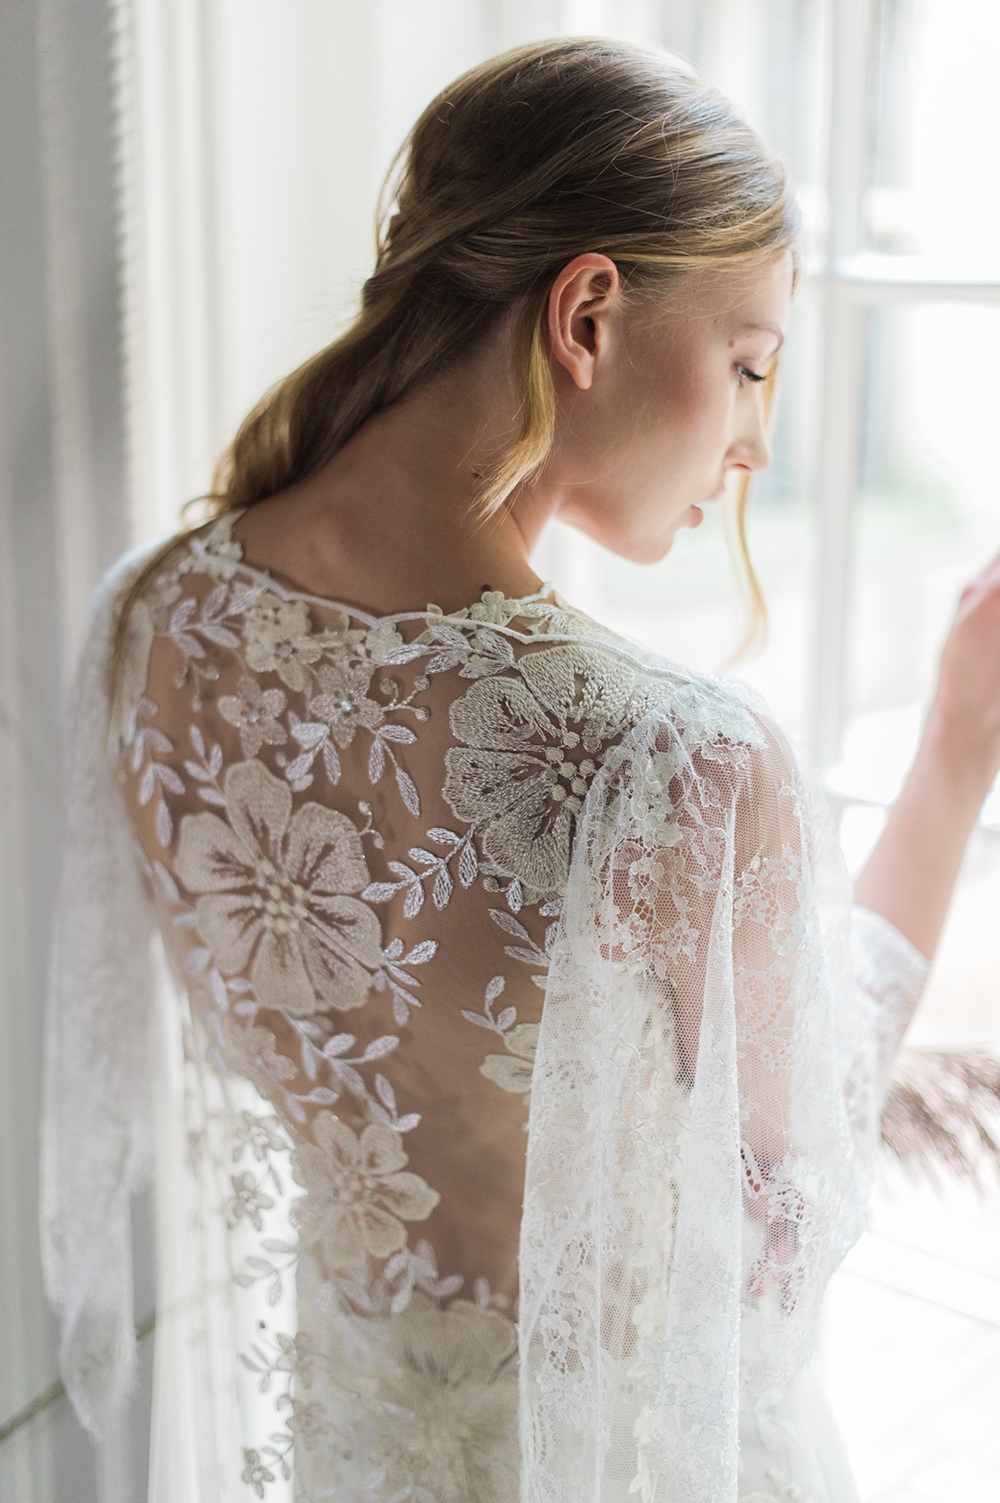 Reverie - Claire Pettibone 2017 Bridal Collection. Photo by Judy Pak. www.theweddingnotebook.com